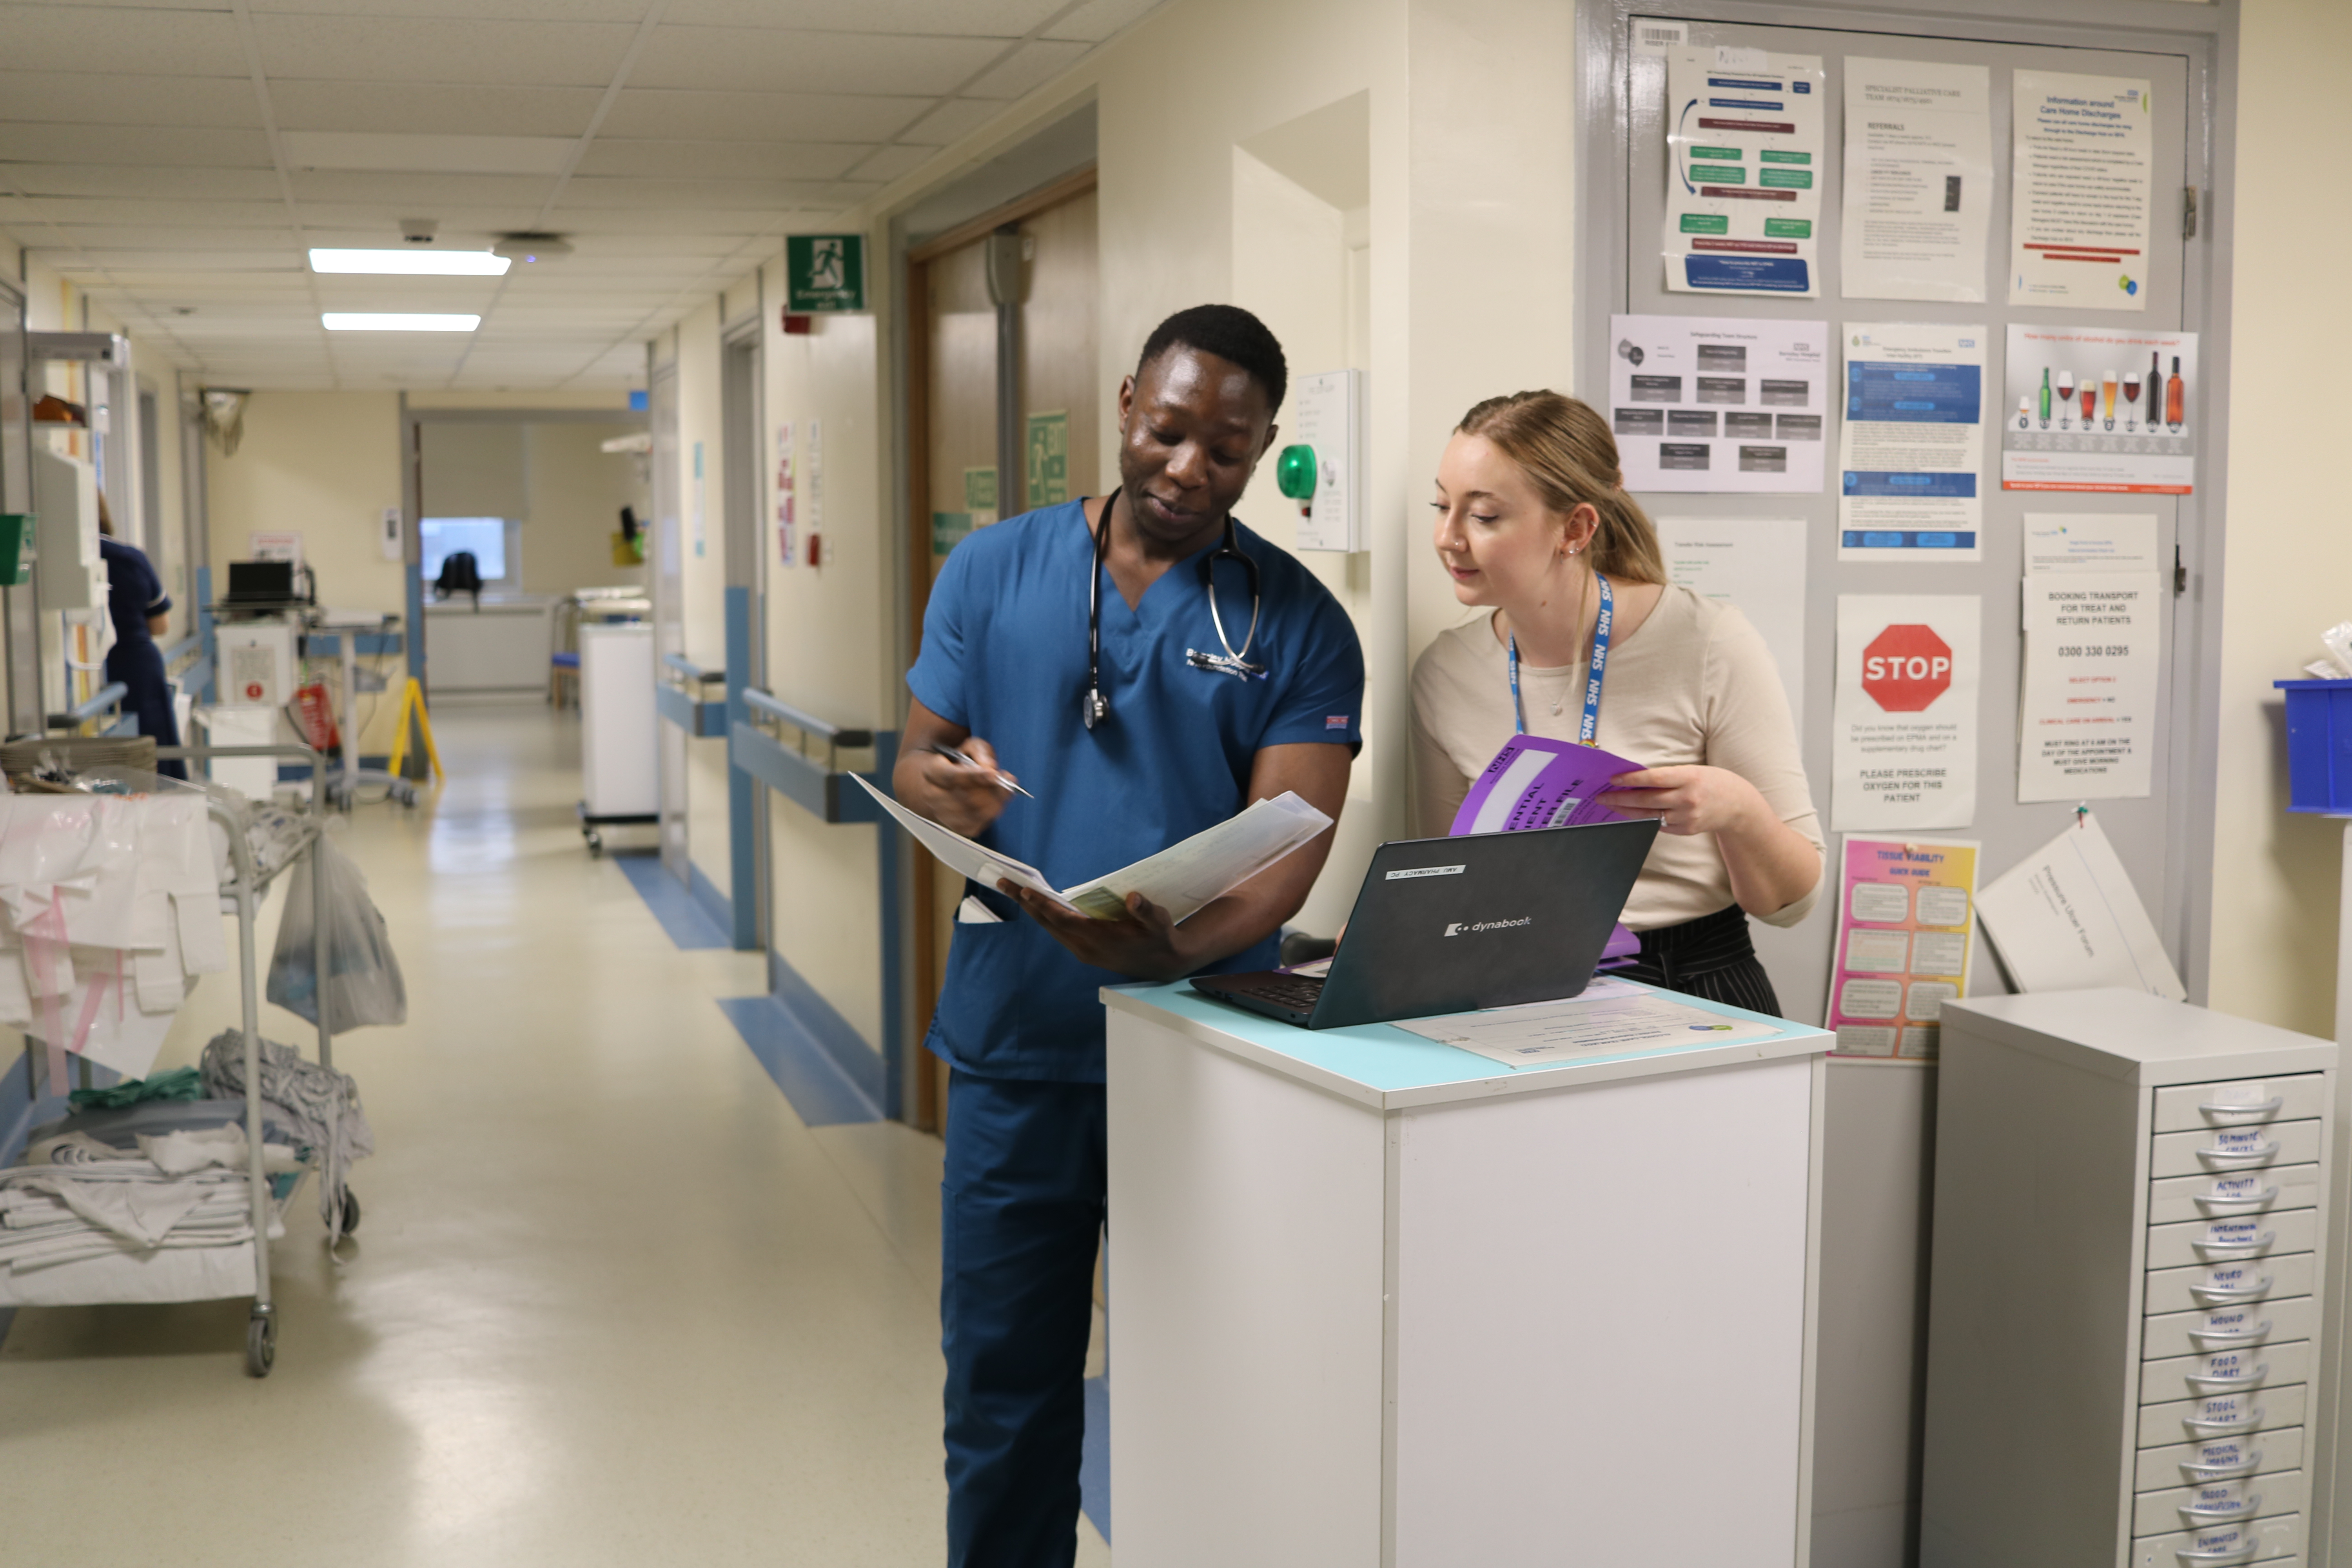 Colleagues review a document on a ward